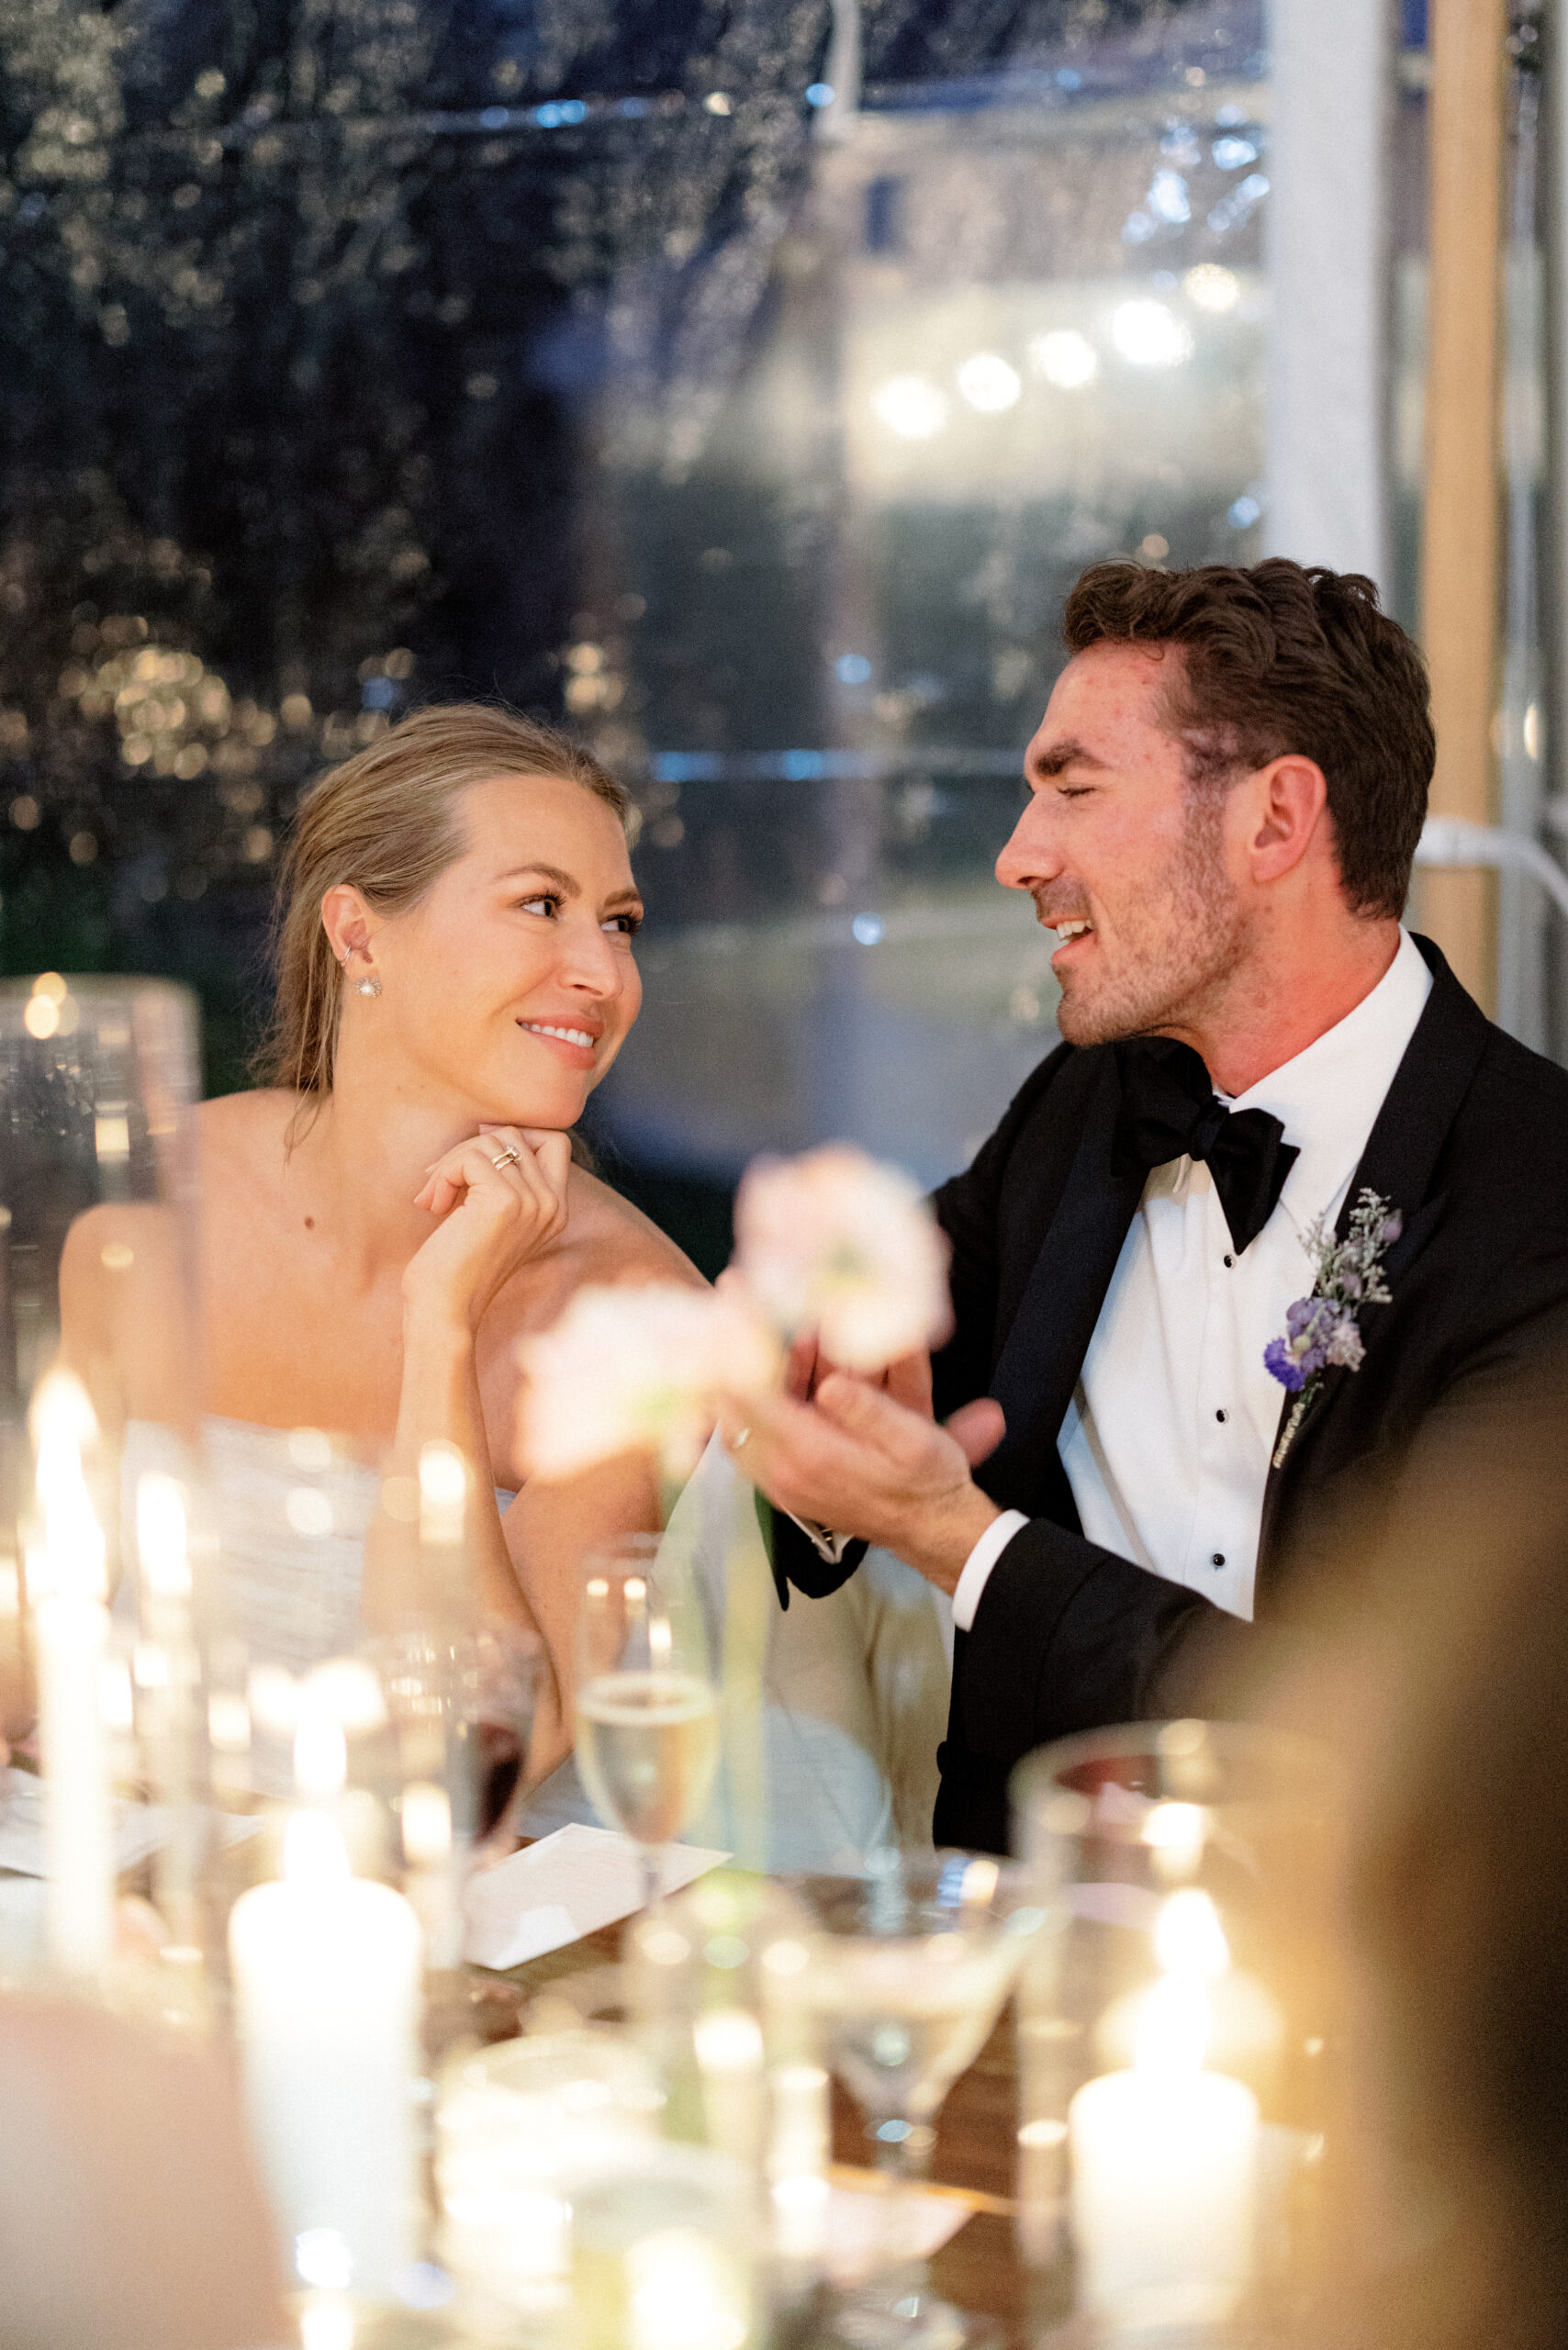 Candid shot of the newlyweds romantically smiling at each other in their wedding reception in the Adirondacks, NY.